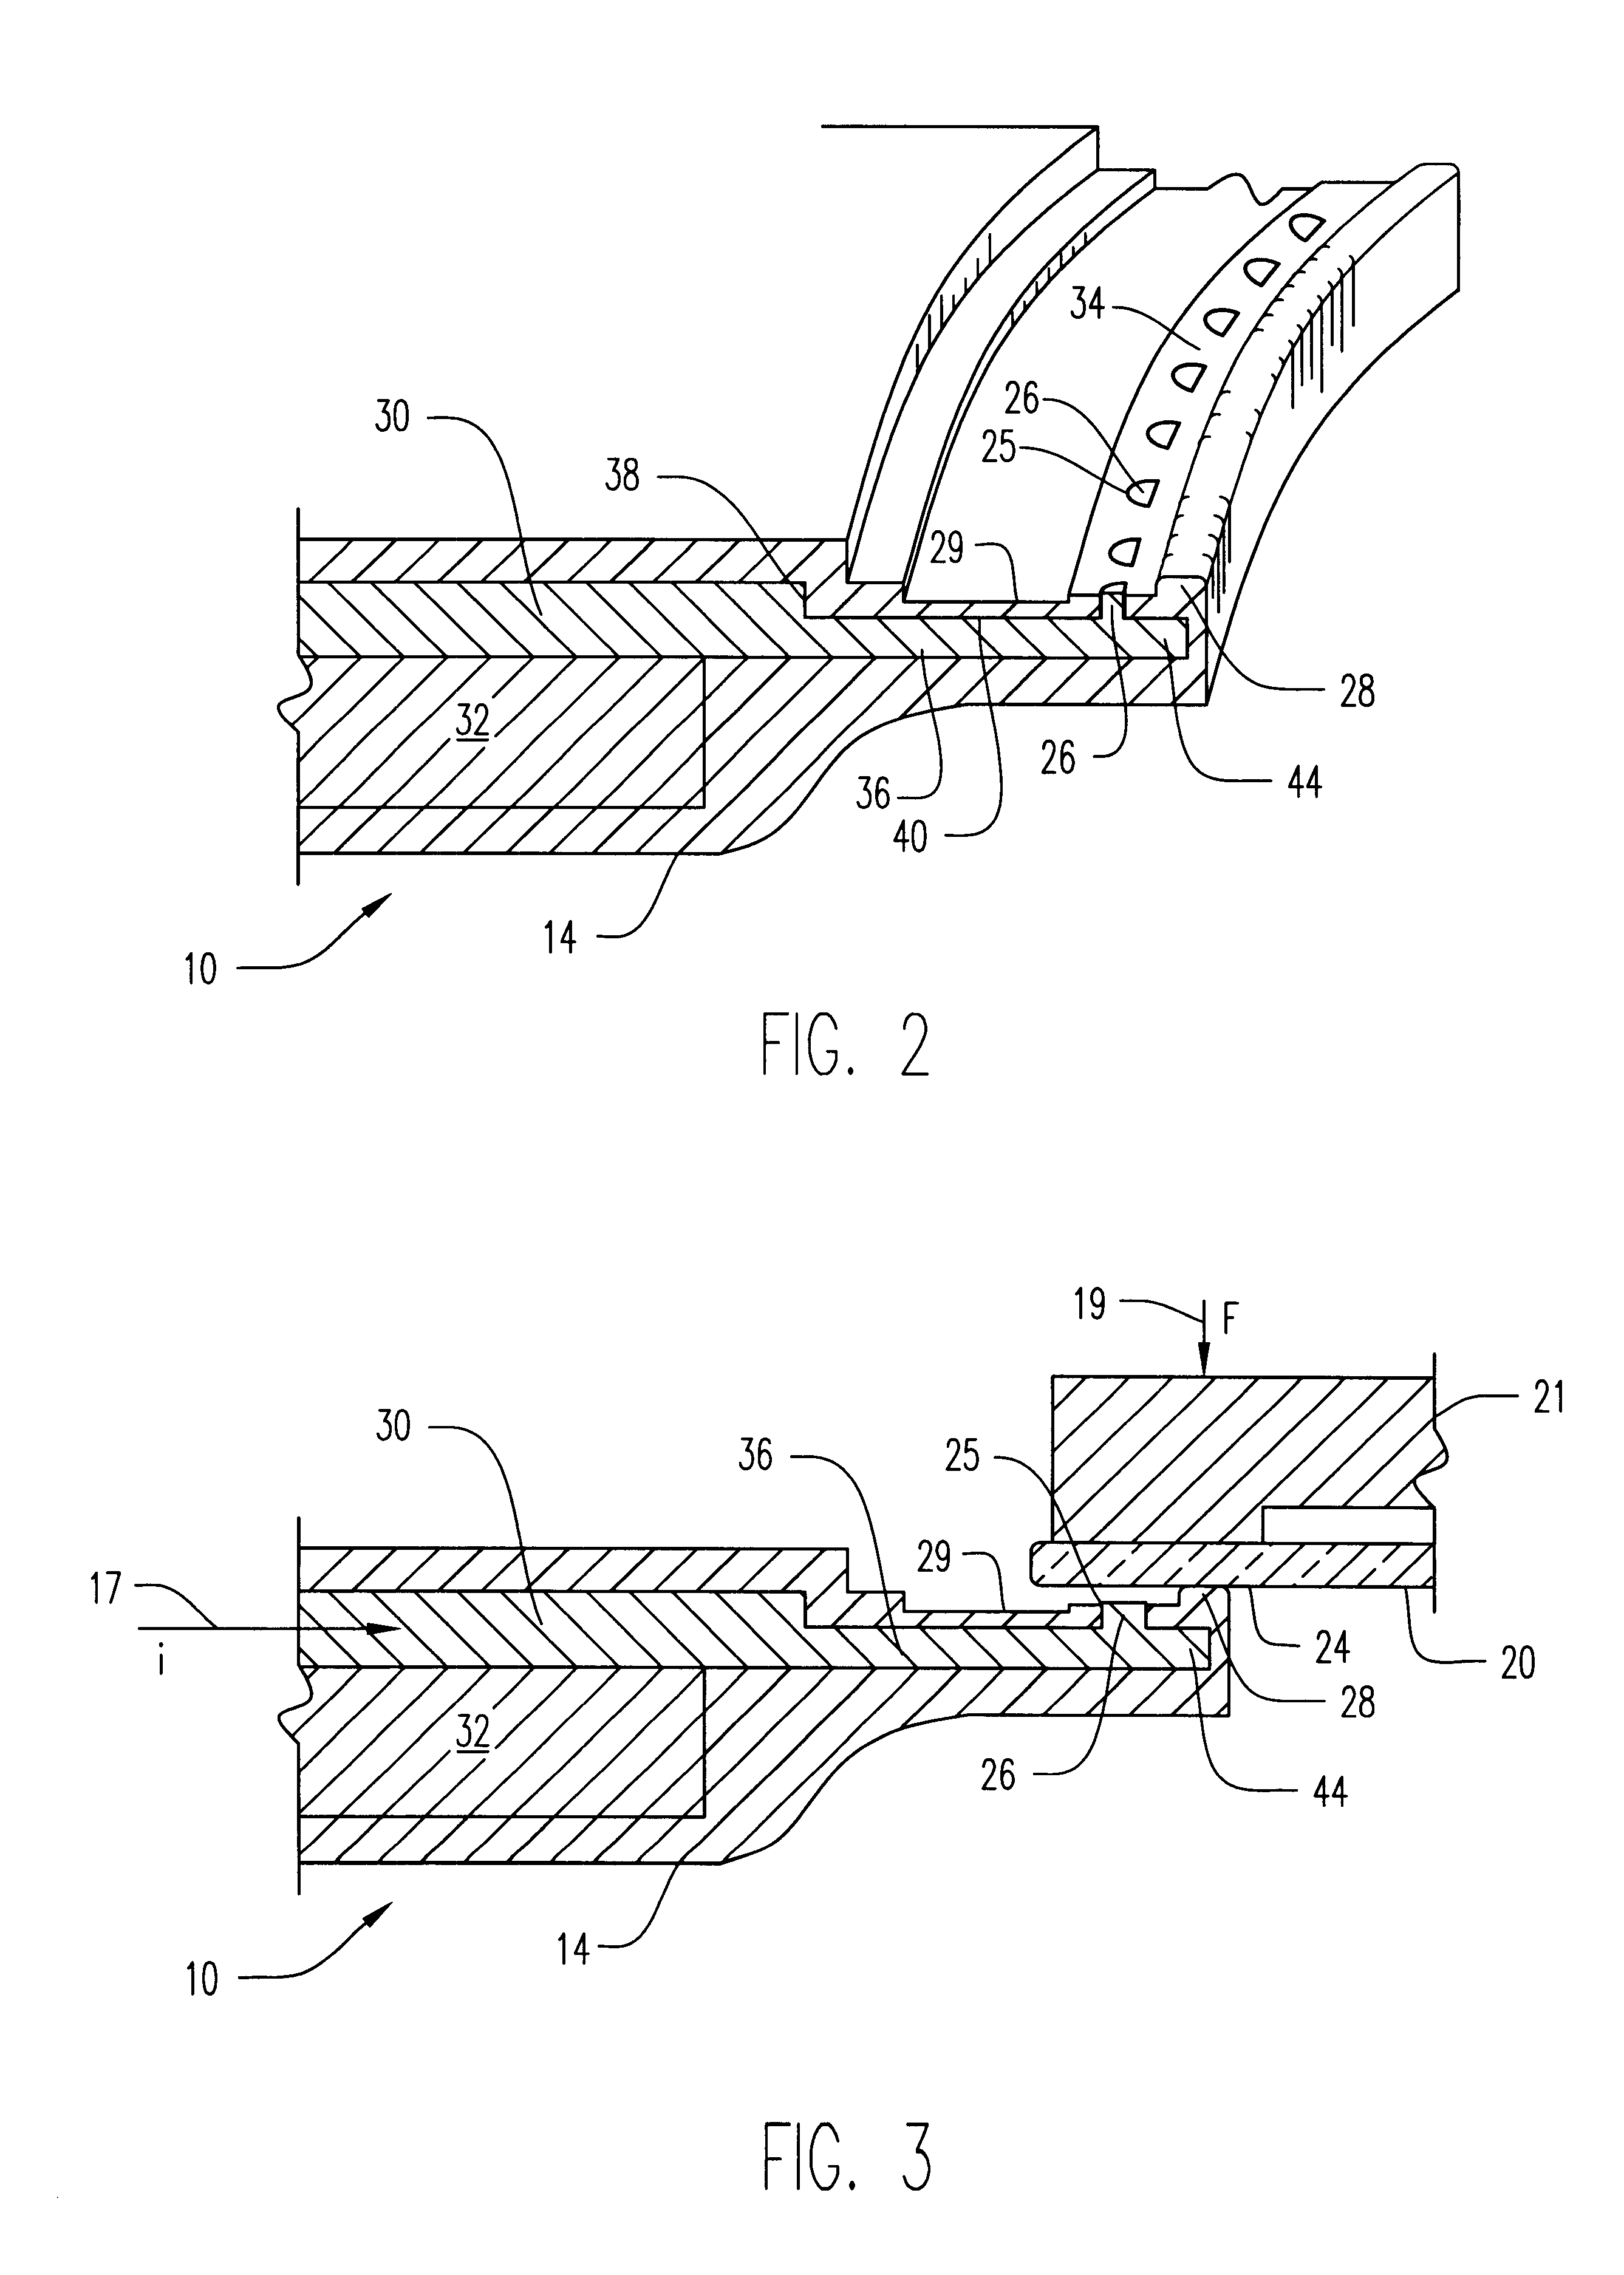 Method of and apparatus for fluid sealing, while electrically contacting, wet-processed workpieces